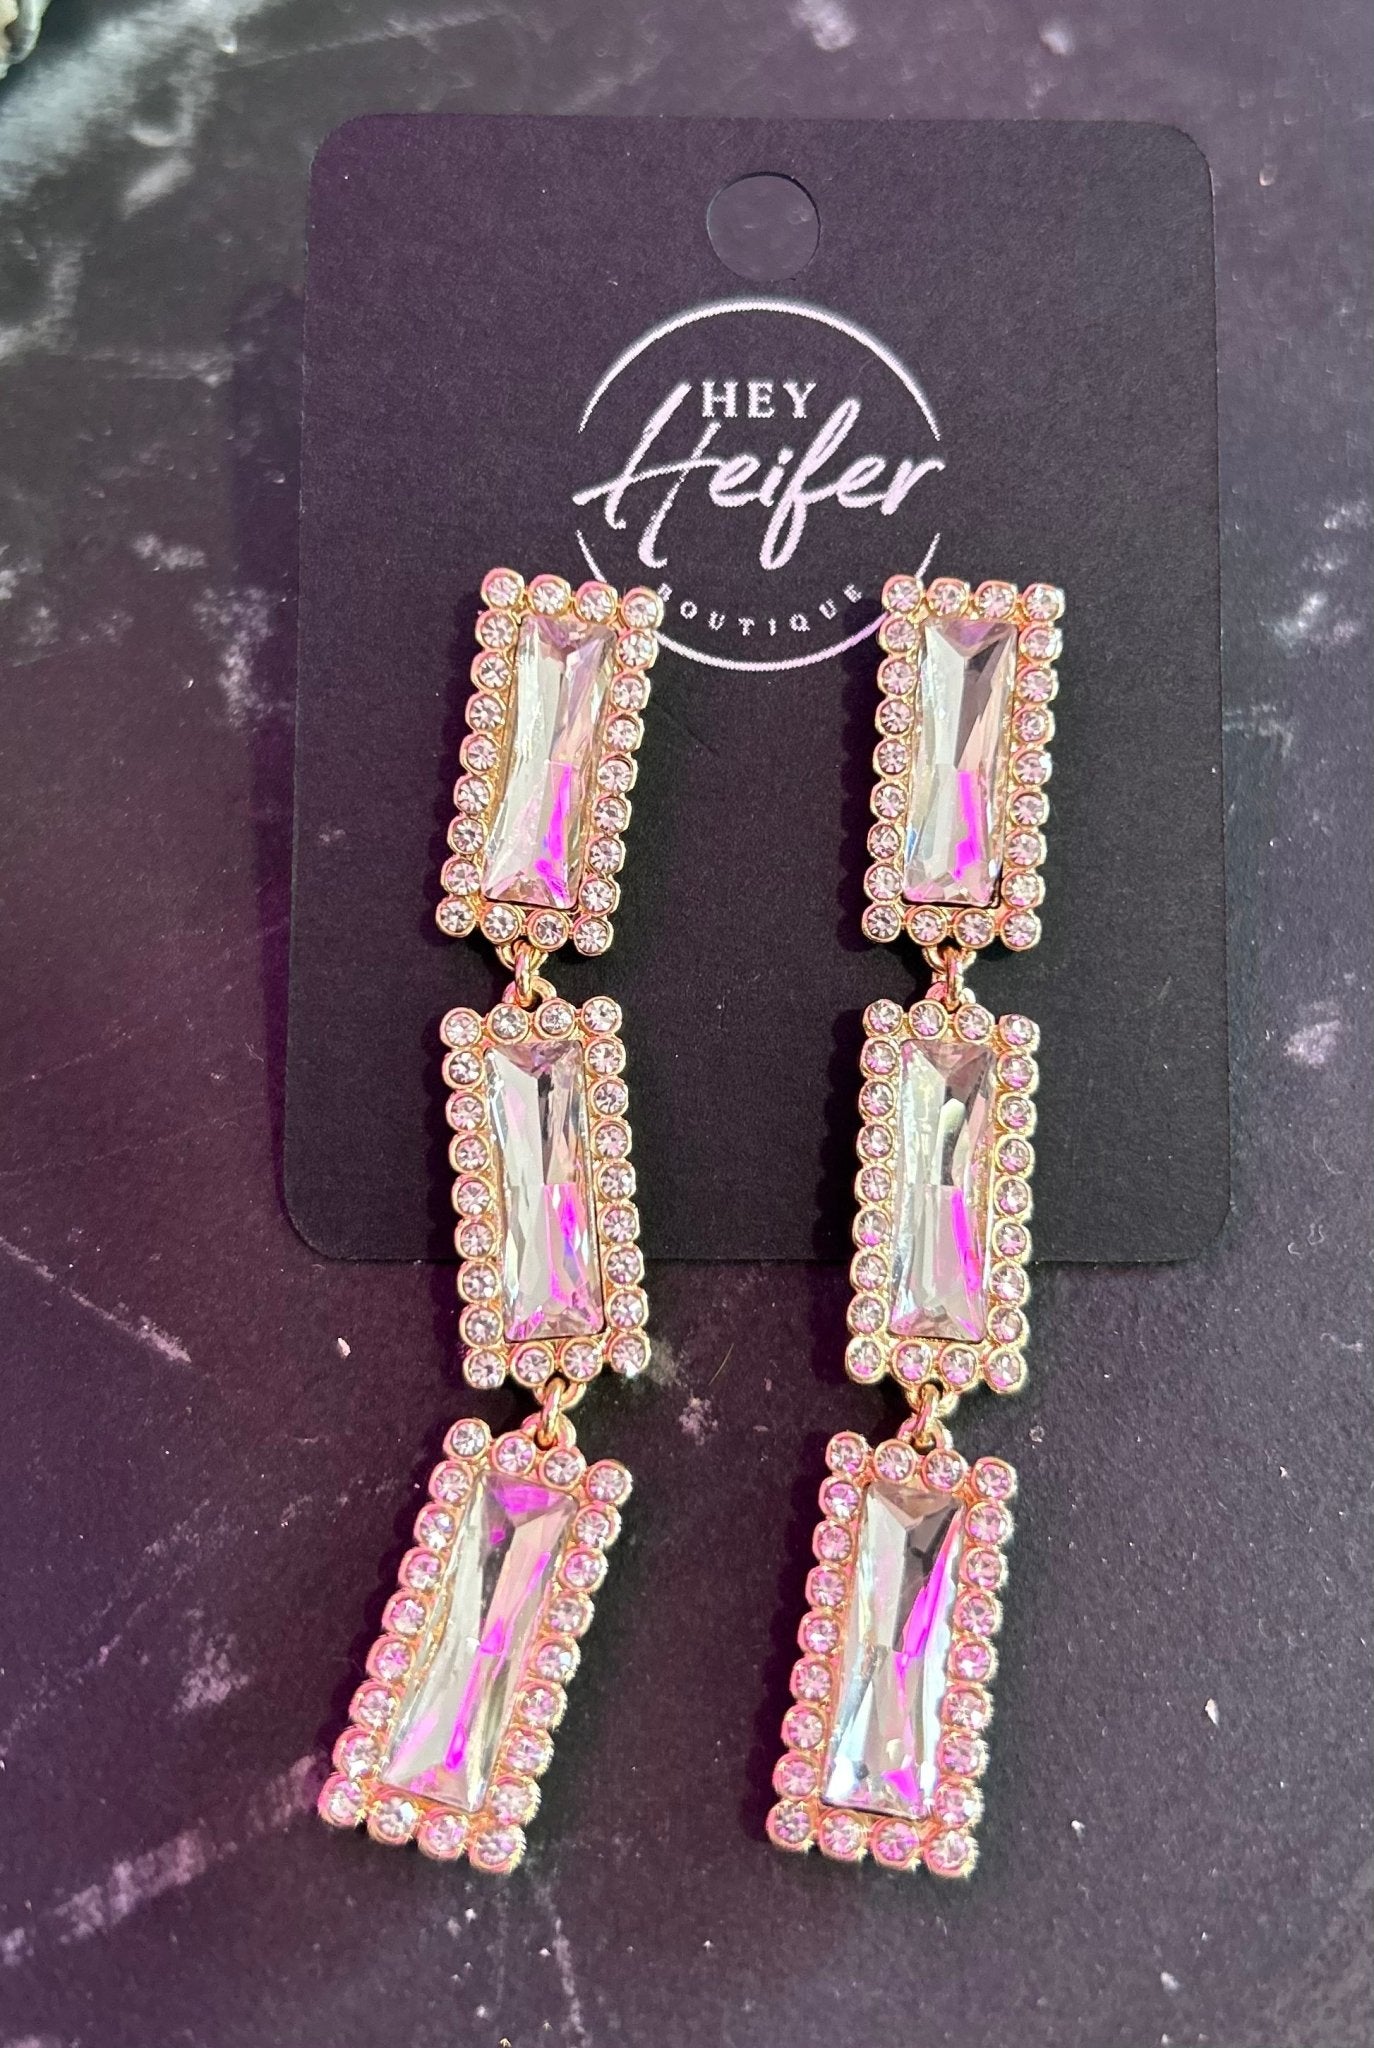 The Be Dazzled Earrings - Hey Heifer Boutique